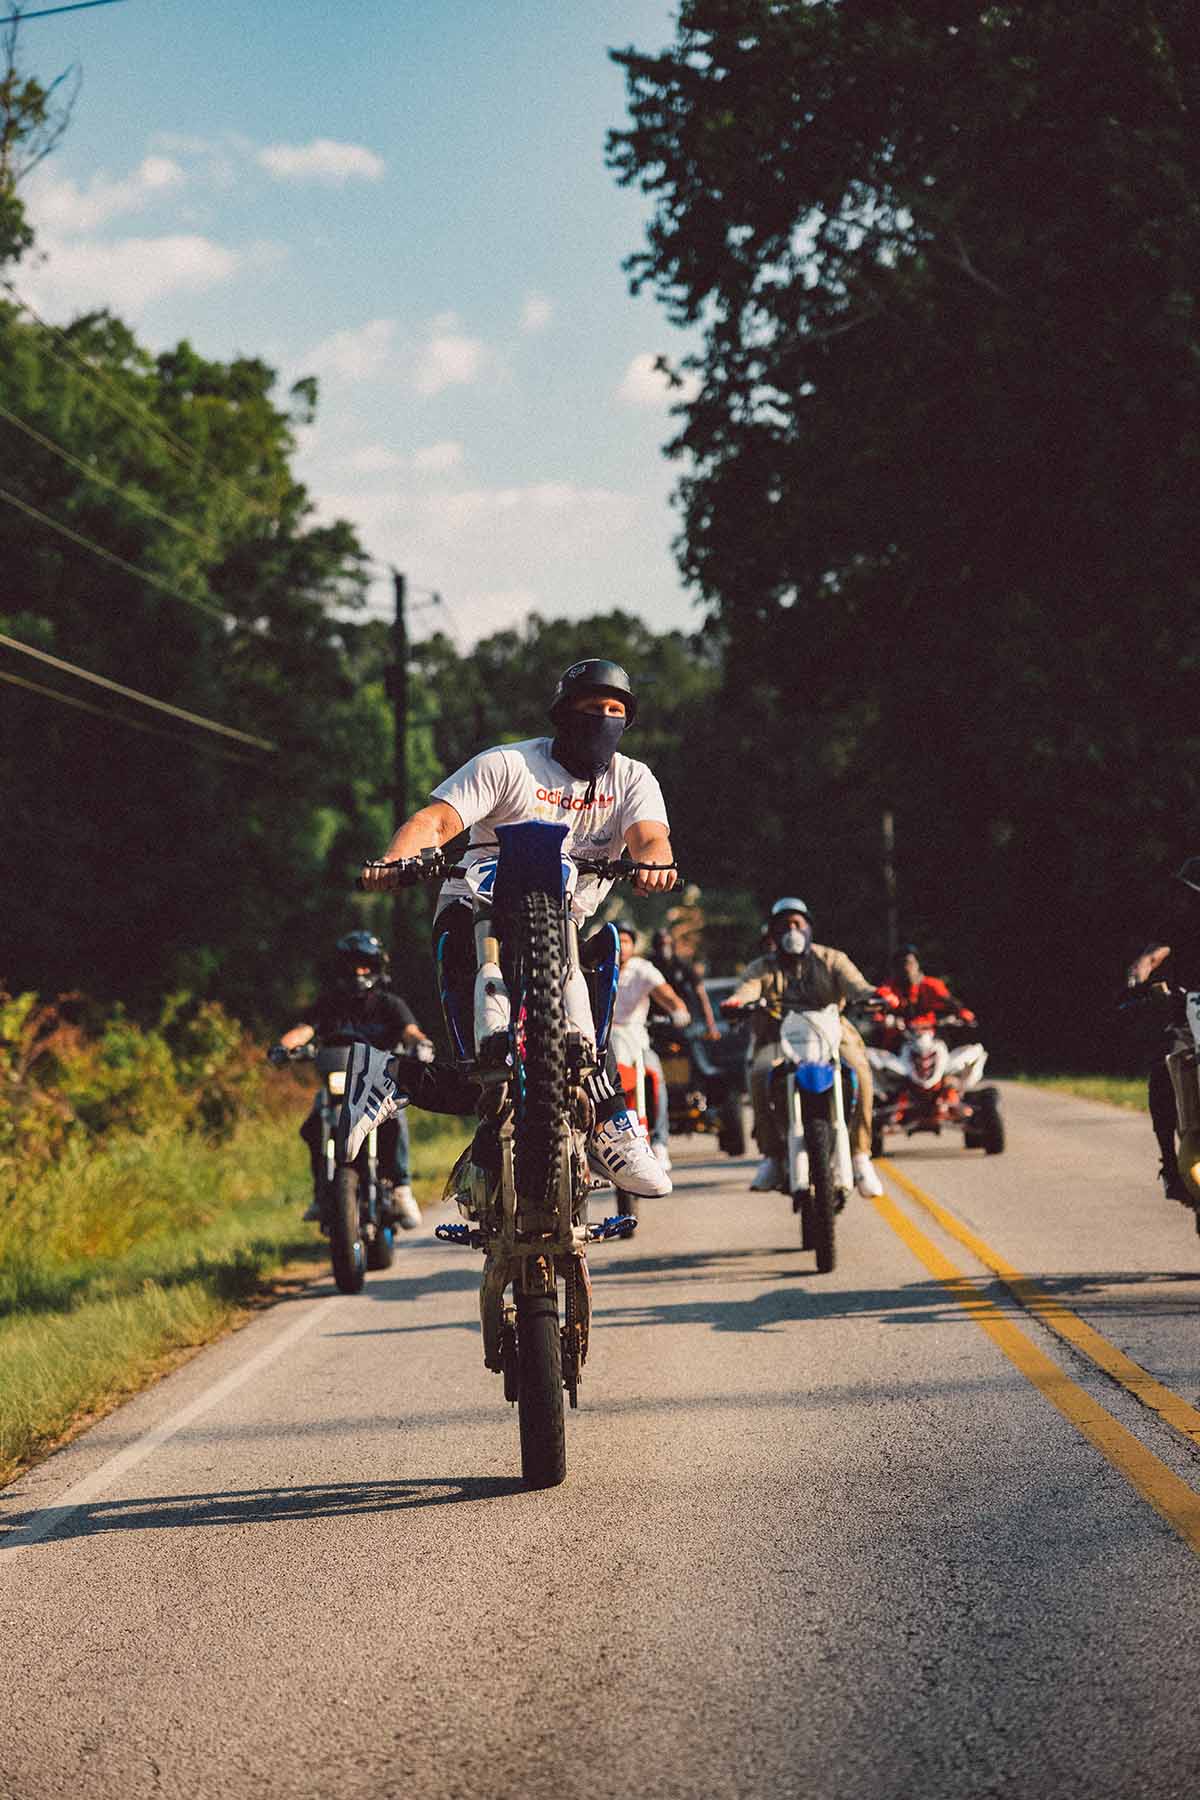 An Inside Look at Atlanta's Bike Life With Photographer SIG